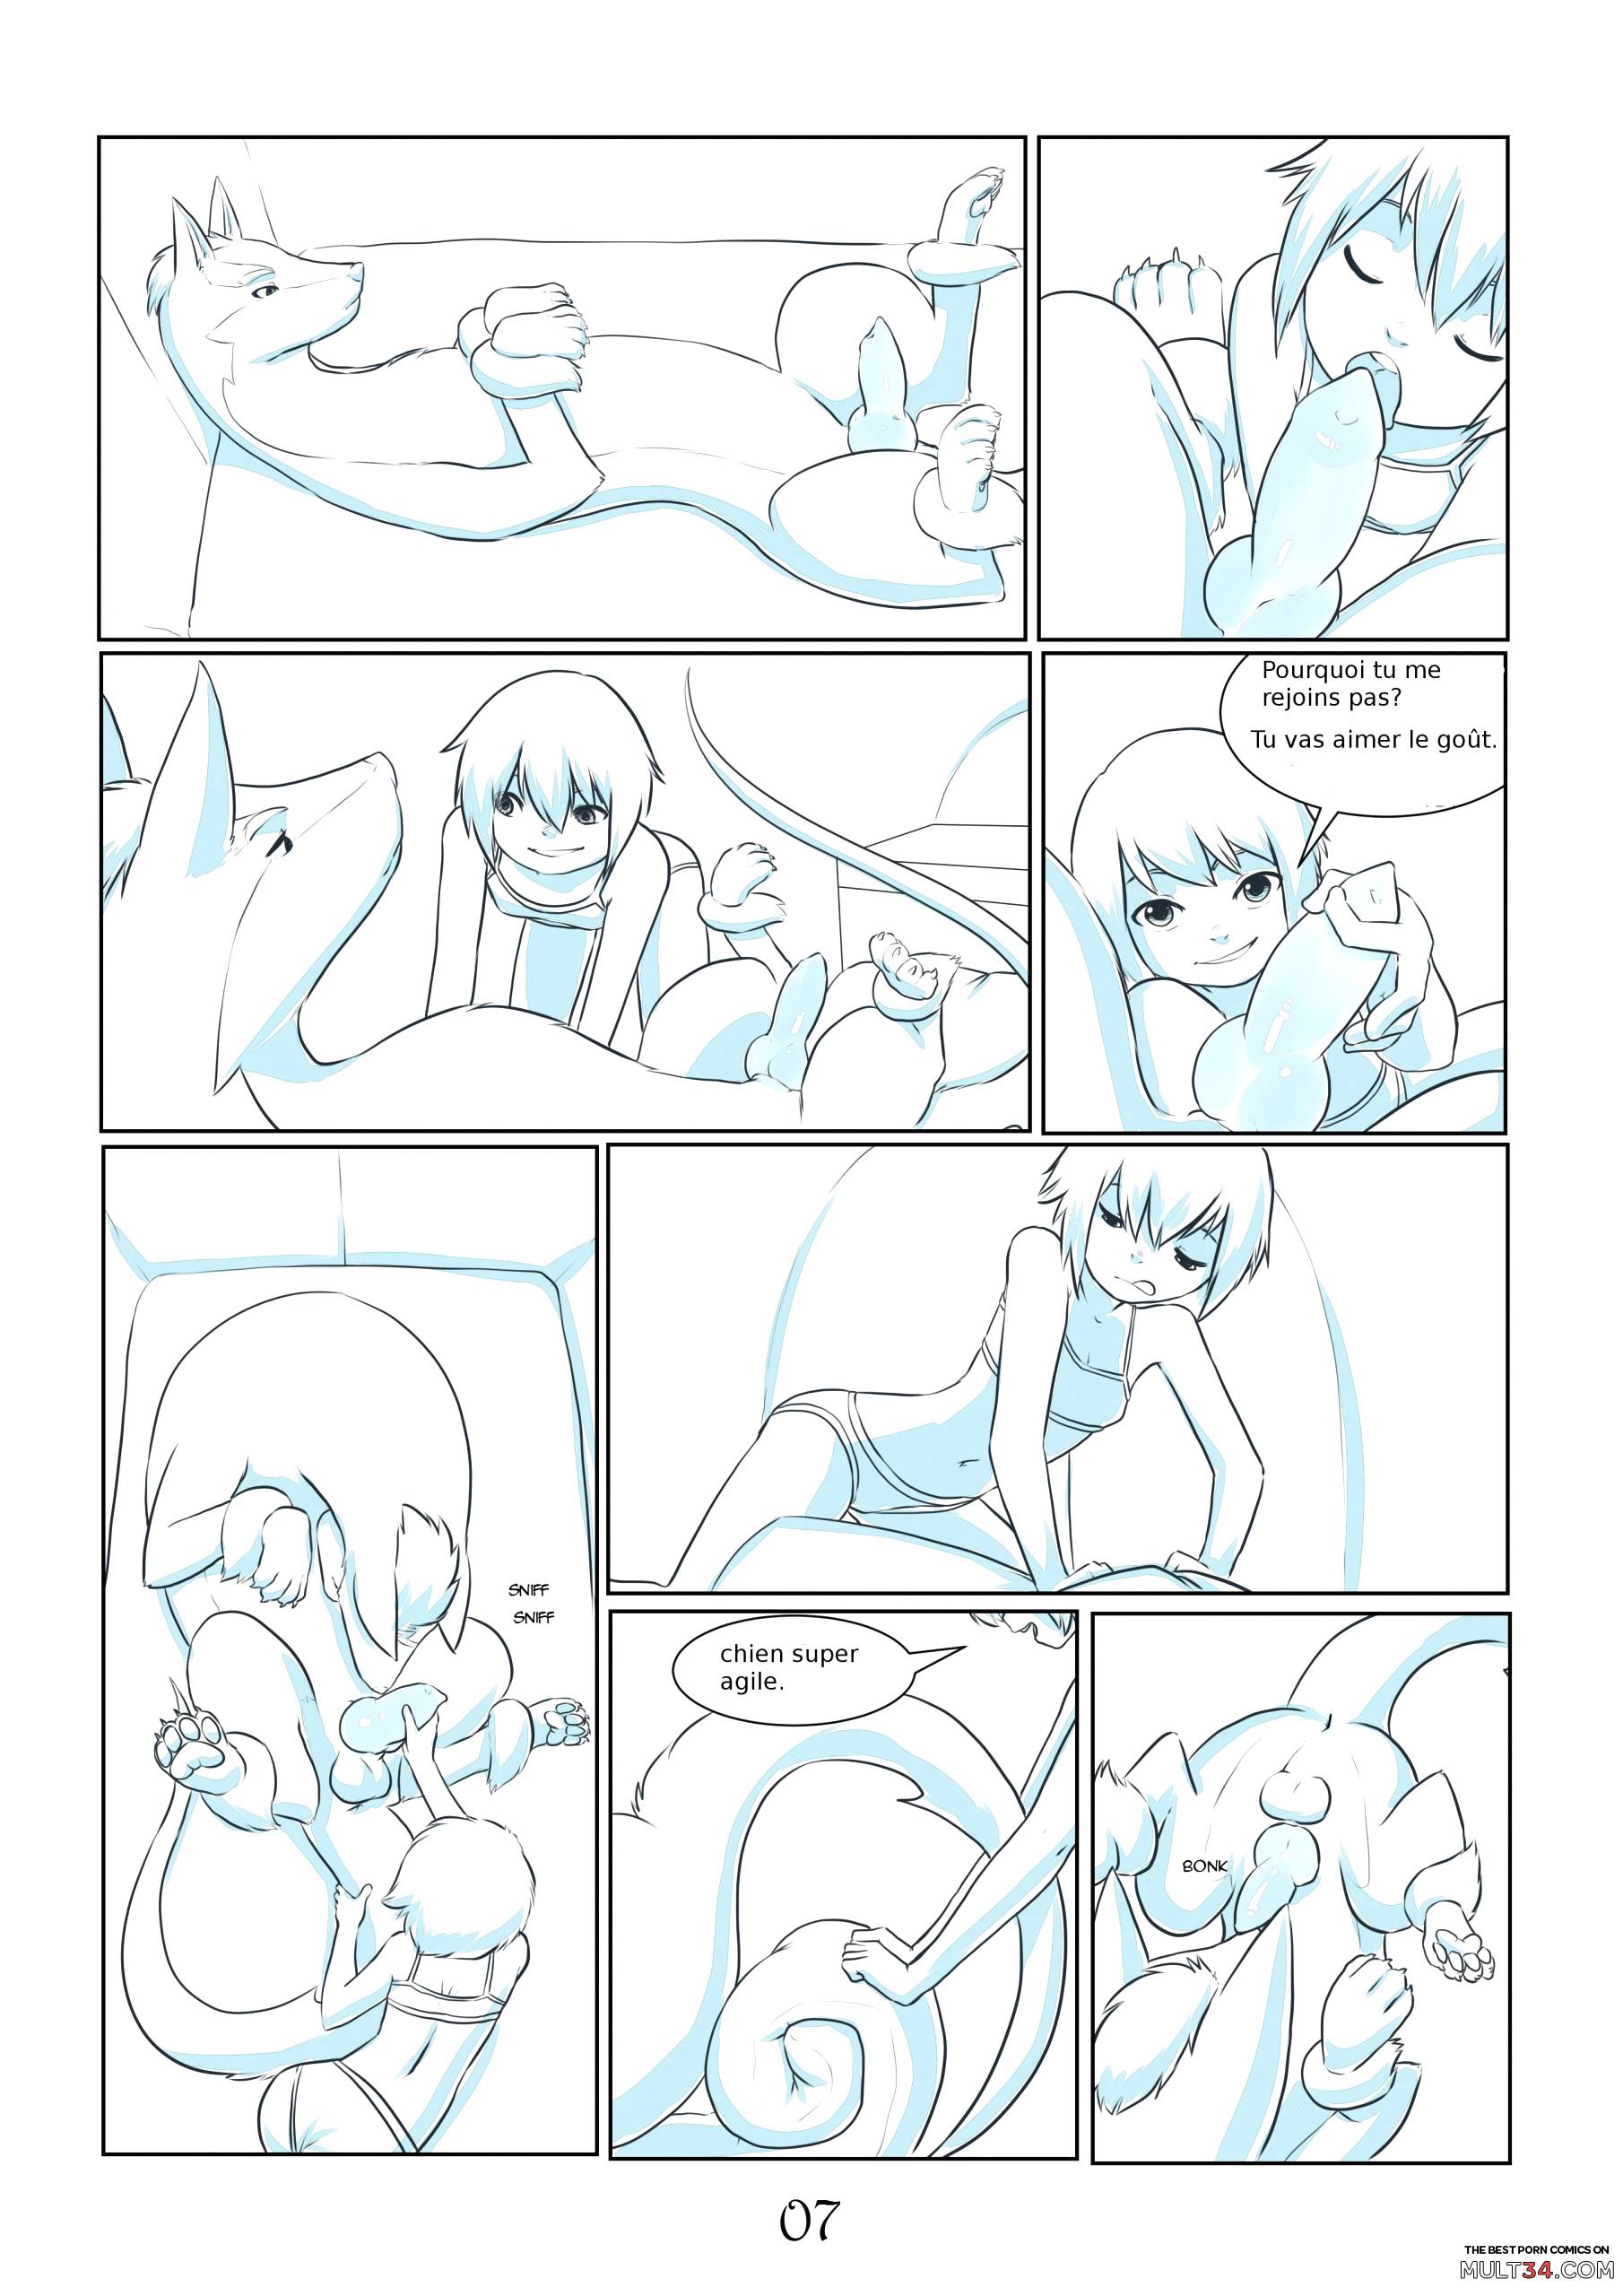 Tales of Rita and Repede - Episode 2 page 8